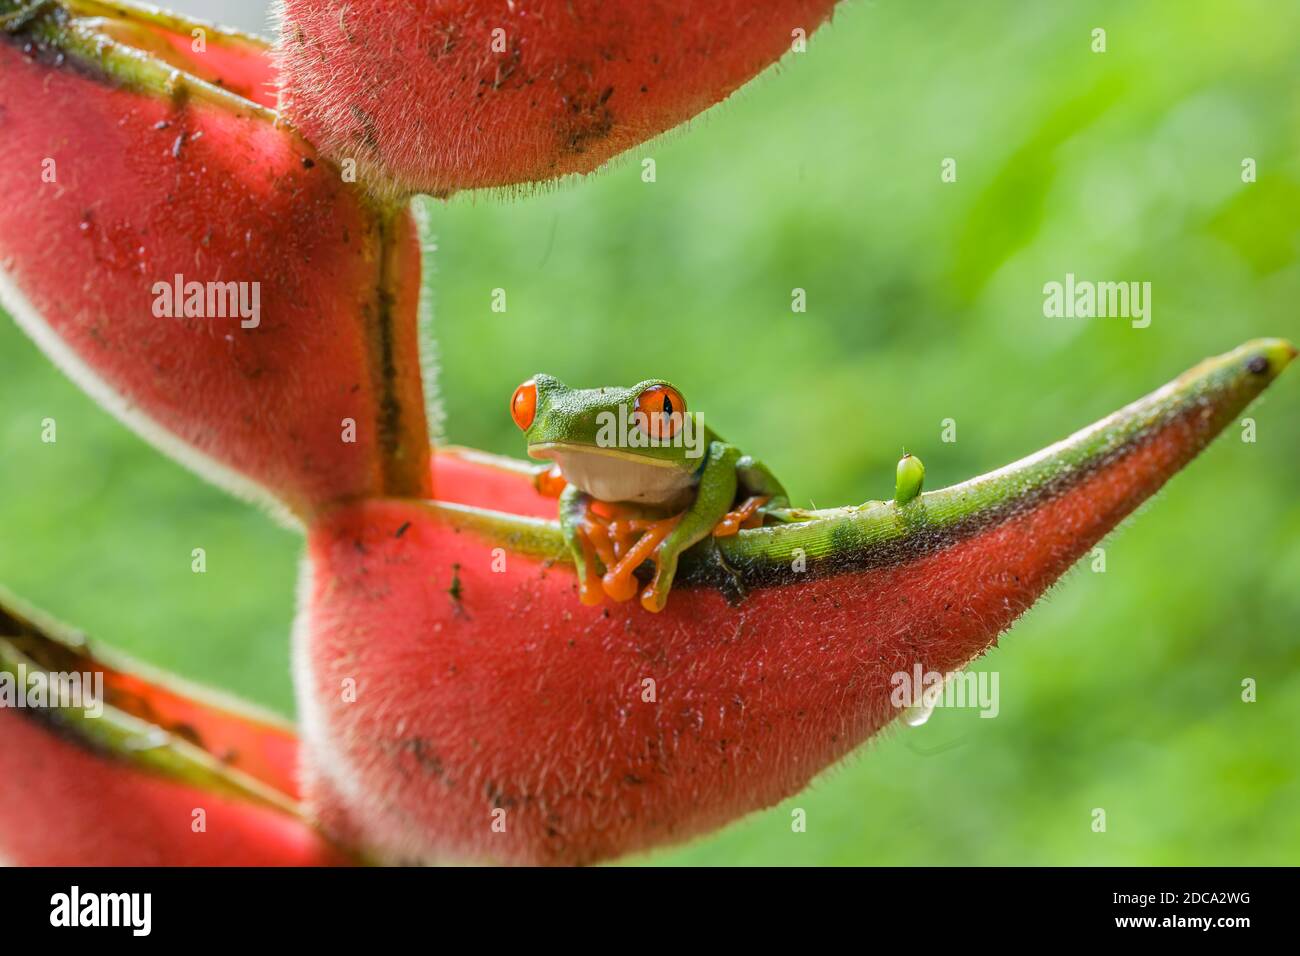 A Red-eyed Leaf Frog, Agalychnis calladryis, on a lobster claw heliconia in the Selva Verde Reserve in the rainforest of Costa Rica. Stock Photo